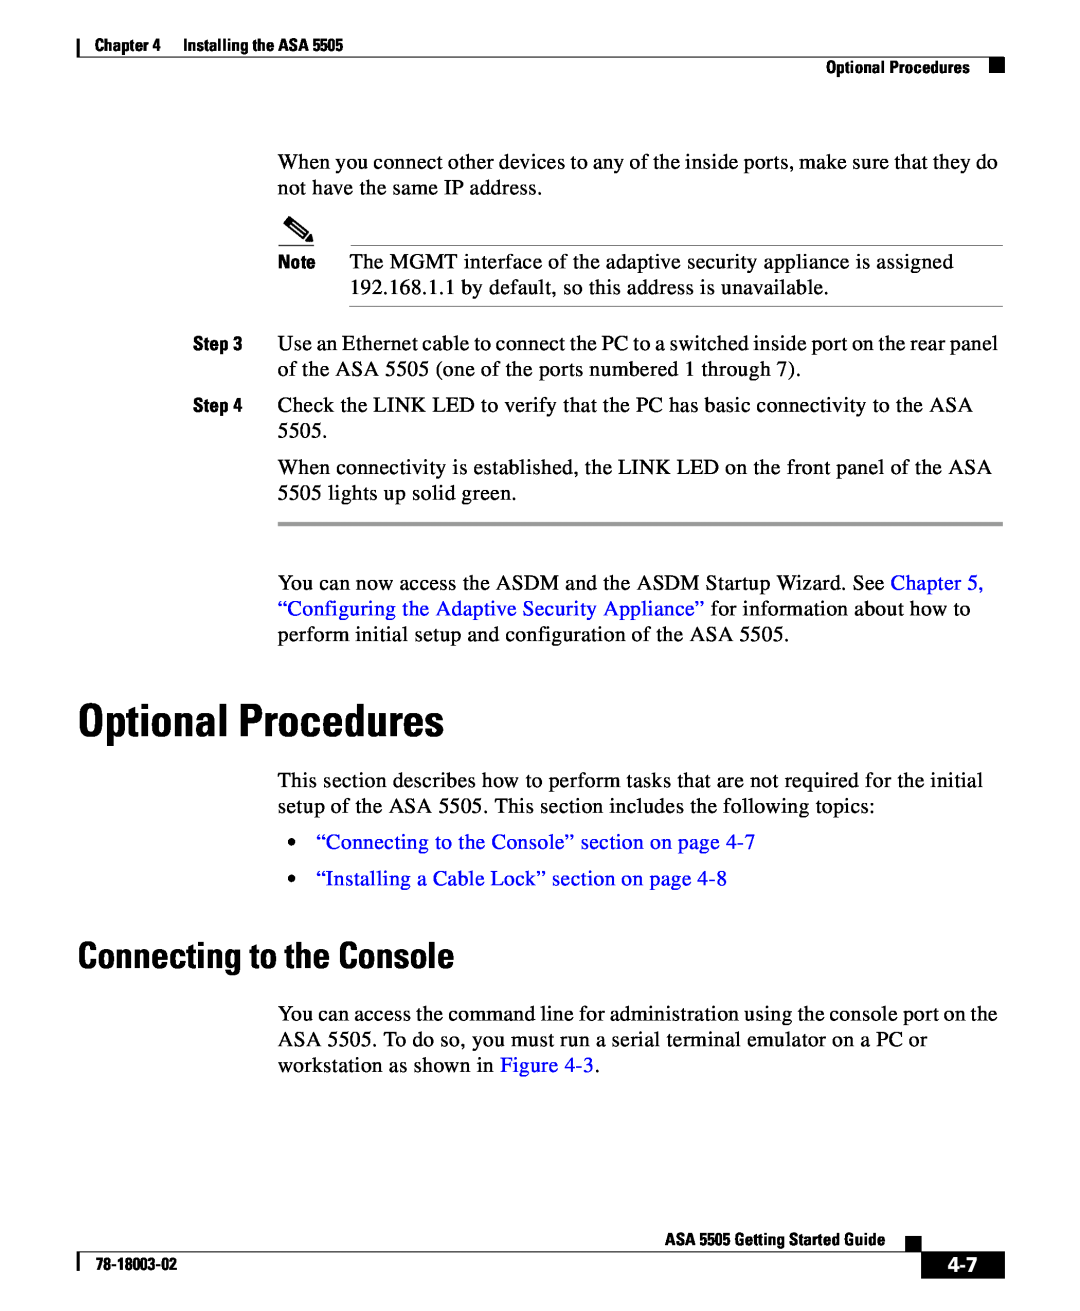 Cisco Systems 5505 manual Optional Procedures, Connecting to the Console 